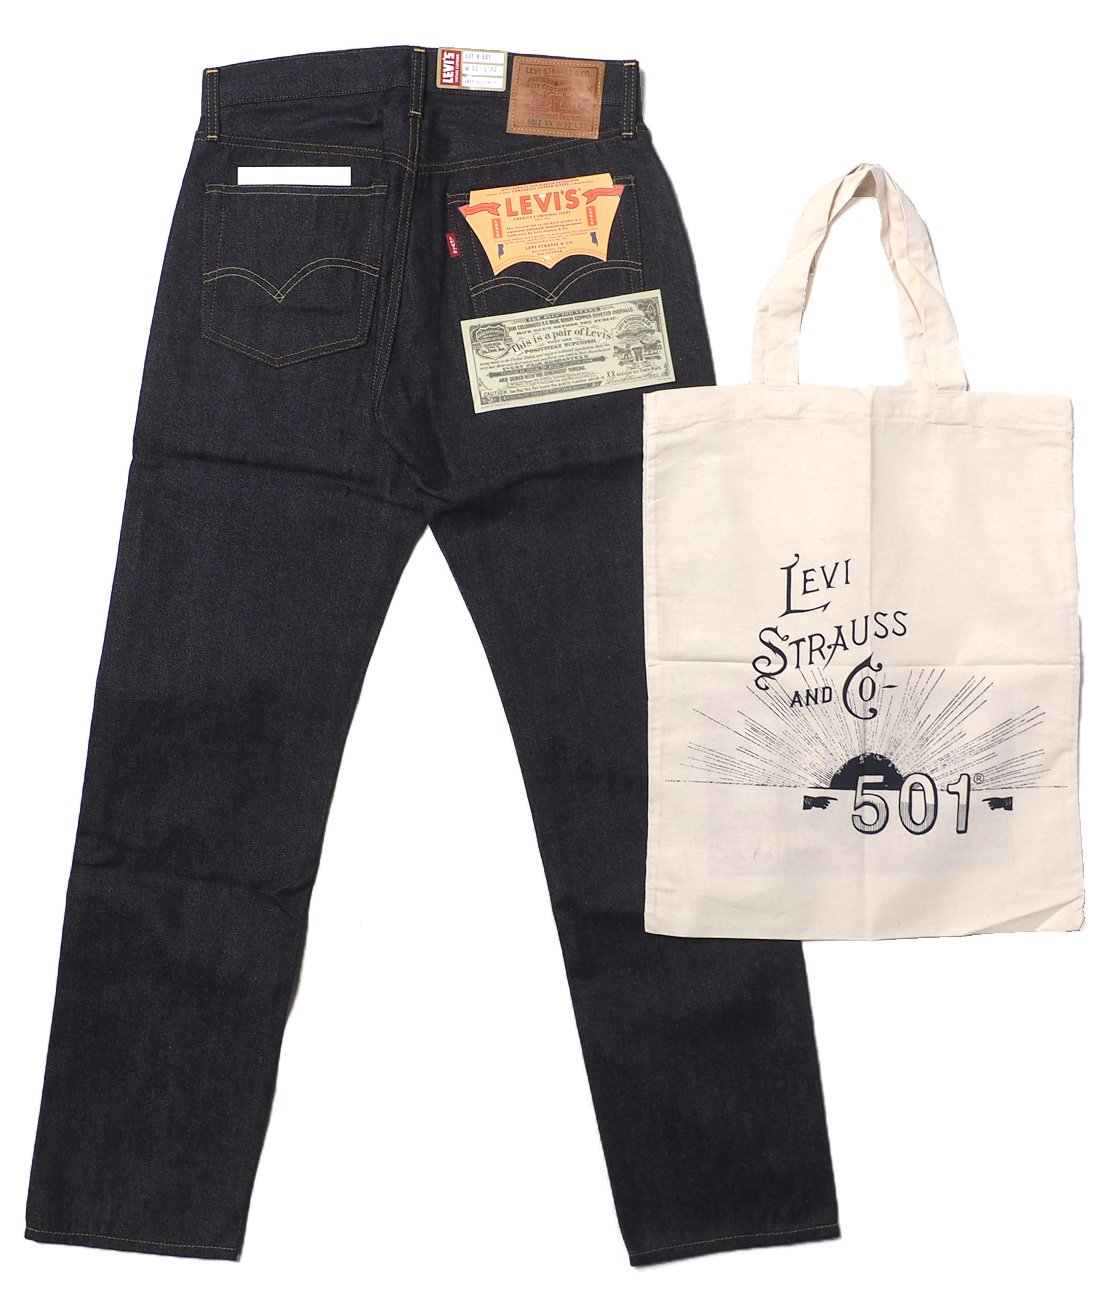 【LEVI'S VINTAGE CLOTHING】1954 501ZXX JEANS - RIGID カイハラデニム ジーンズ リーバイス -  HUNKY DORY